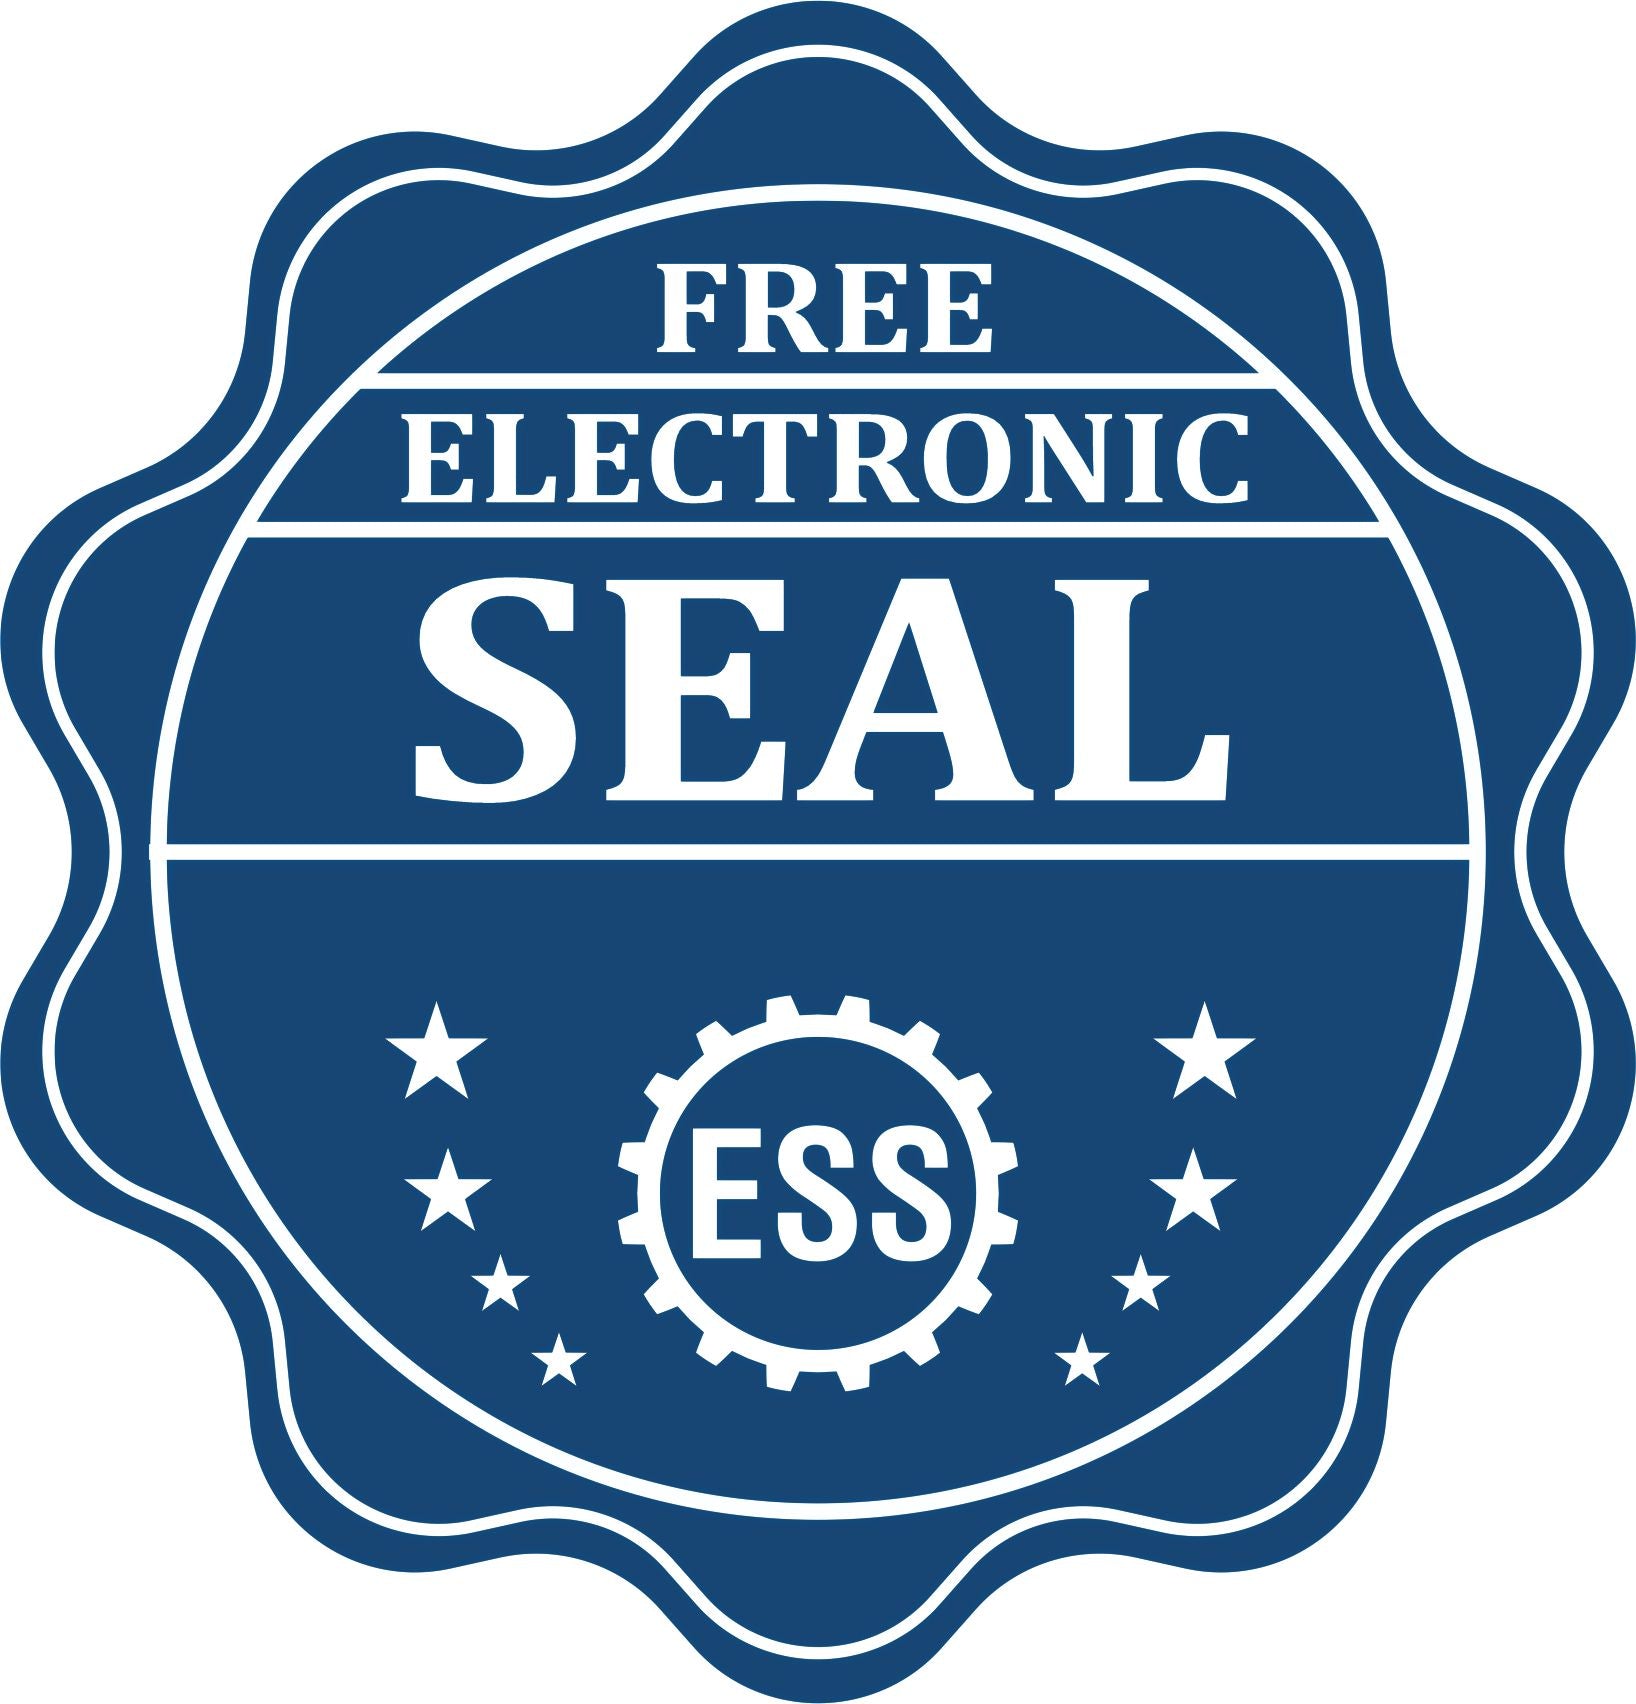 A badge showing a free electronic seal for the Gift Louisiana Engineer Seal with stars and the ESS gear on the emblem.